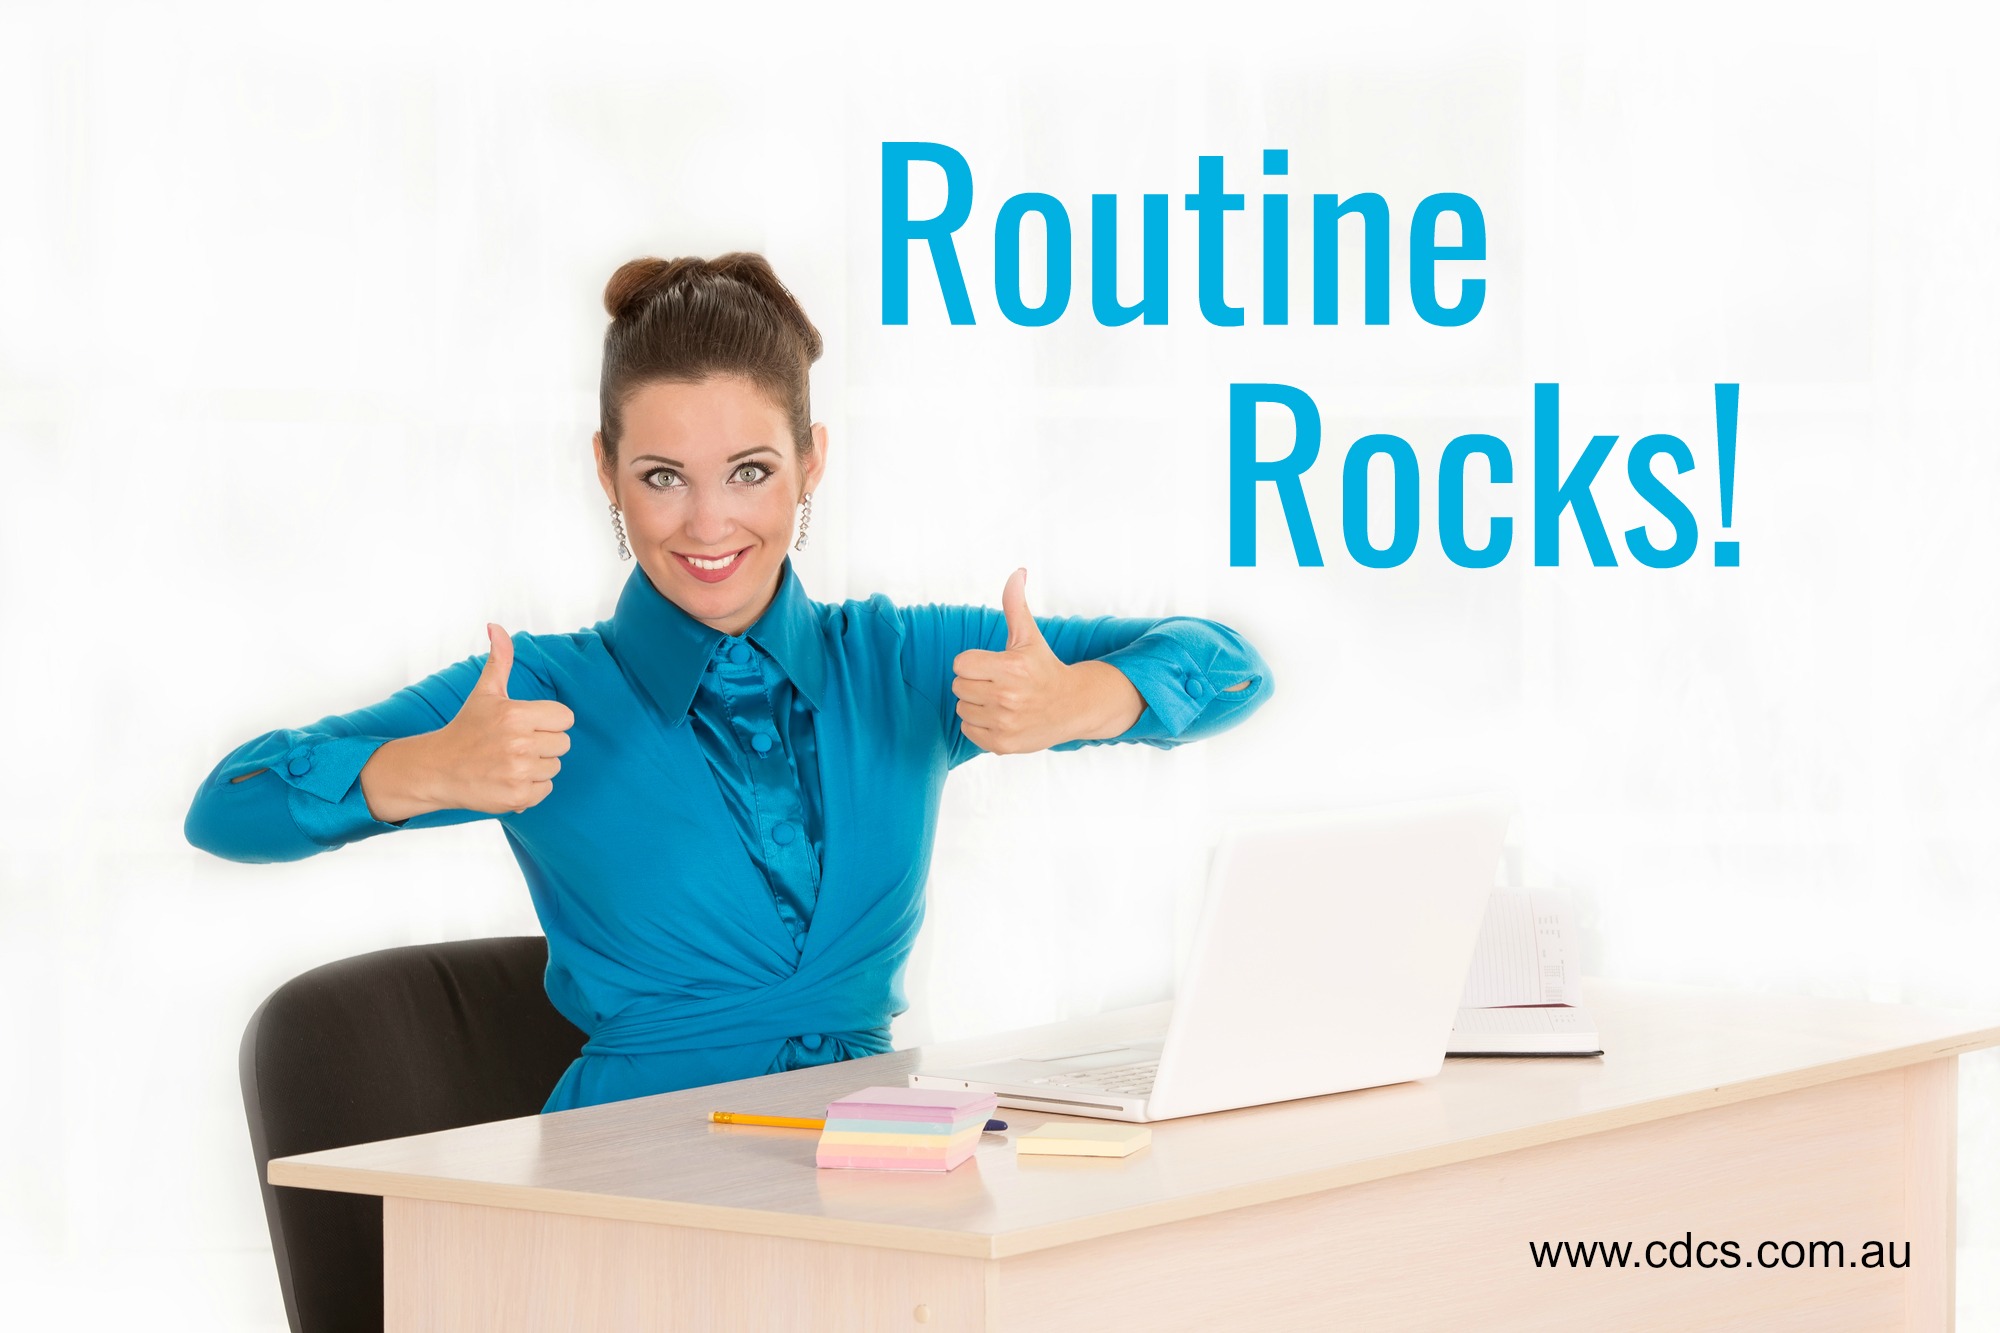 Routine is not a dirty word. Routine is what helps us get through the day without collapsing in exhaustion, or at least help anyway.